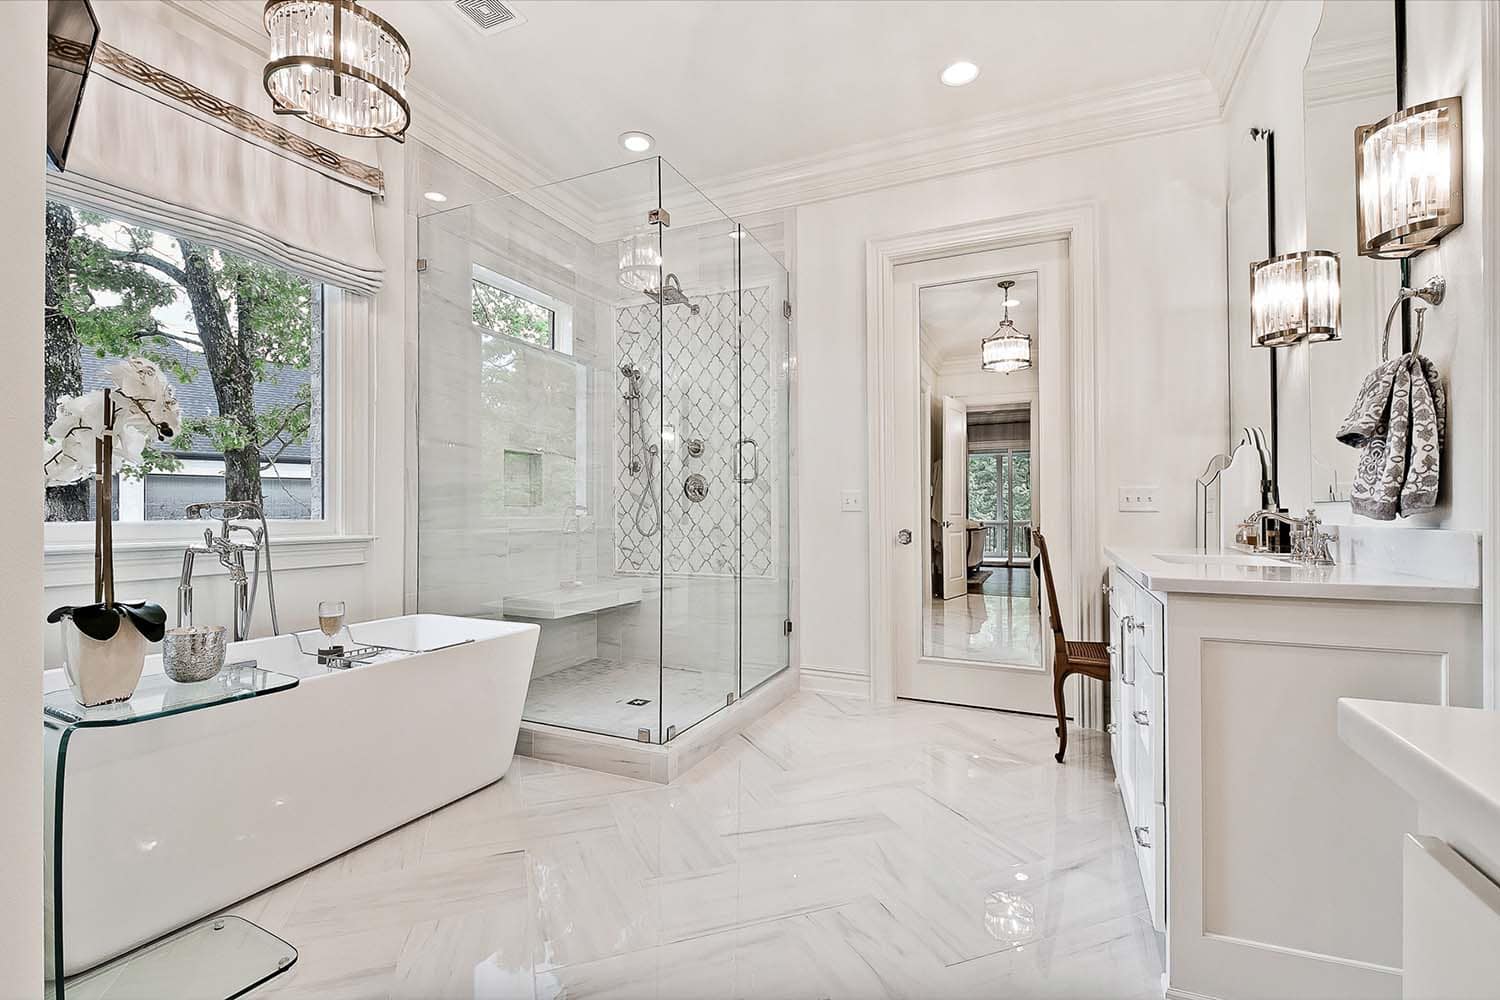 transitional style bathroom with a soaking tub and glass enclosed shower